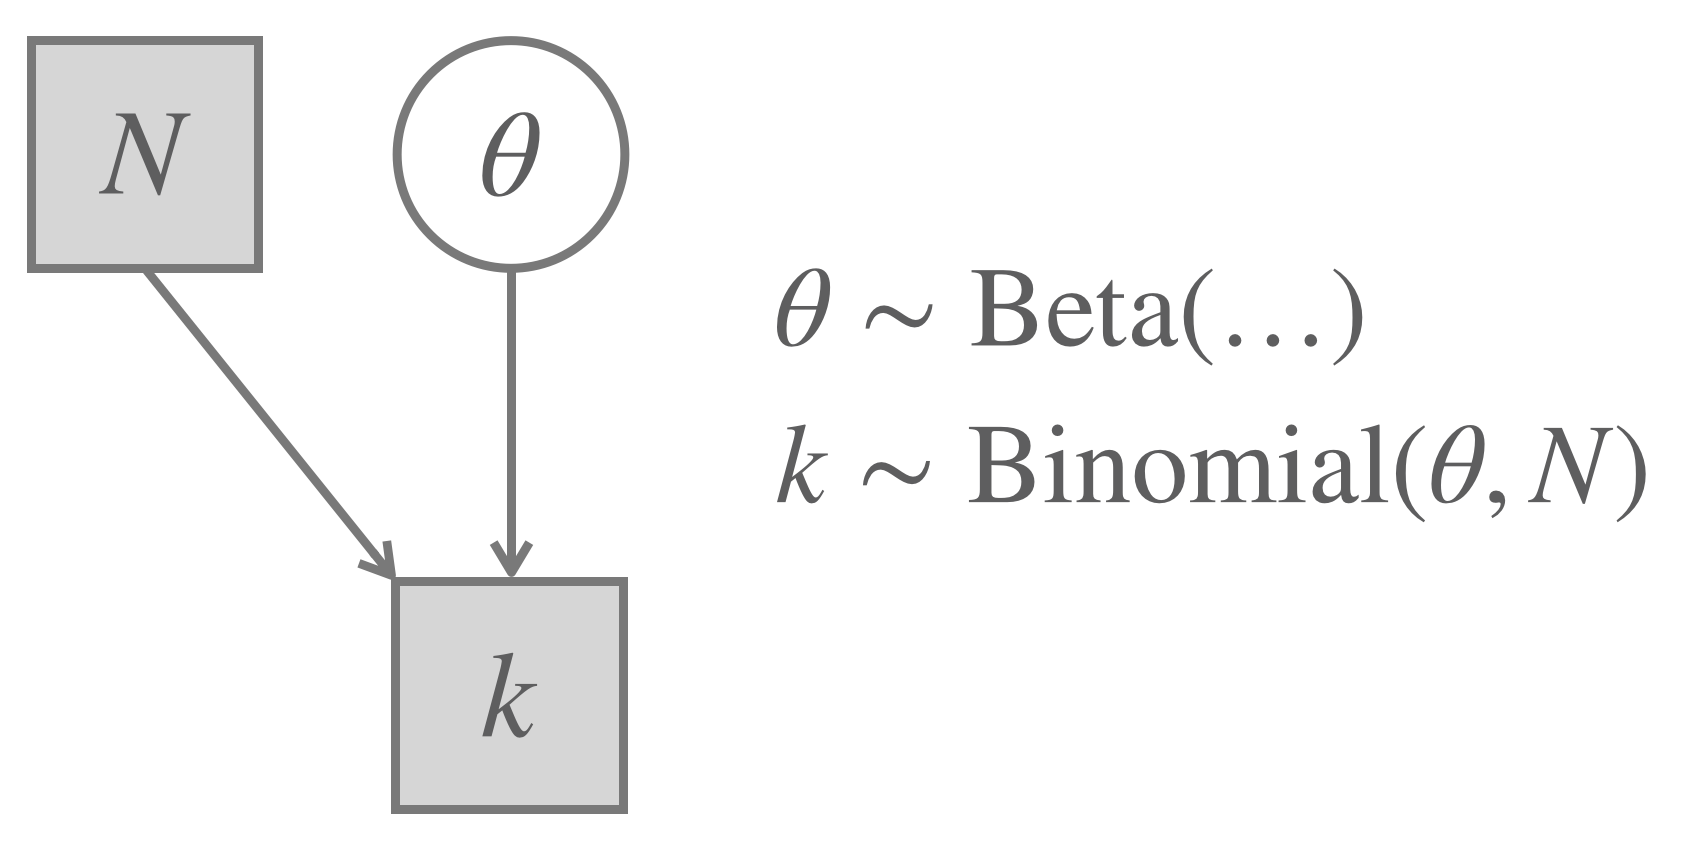 The Binomial Model (repeated from before).